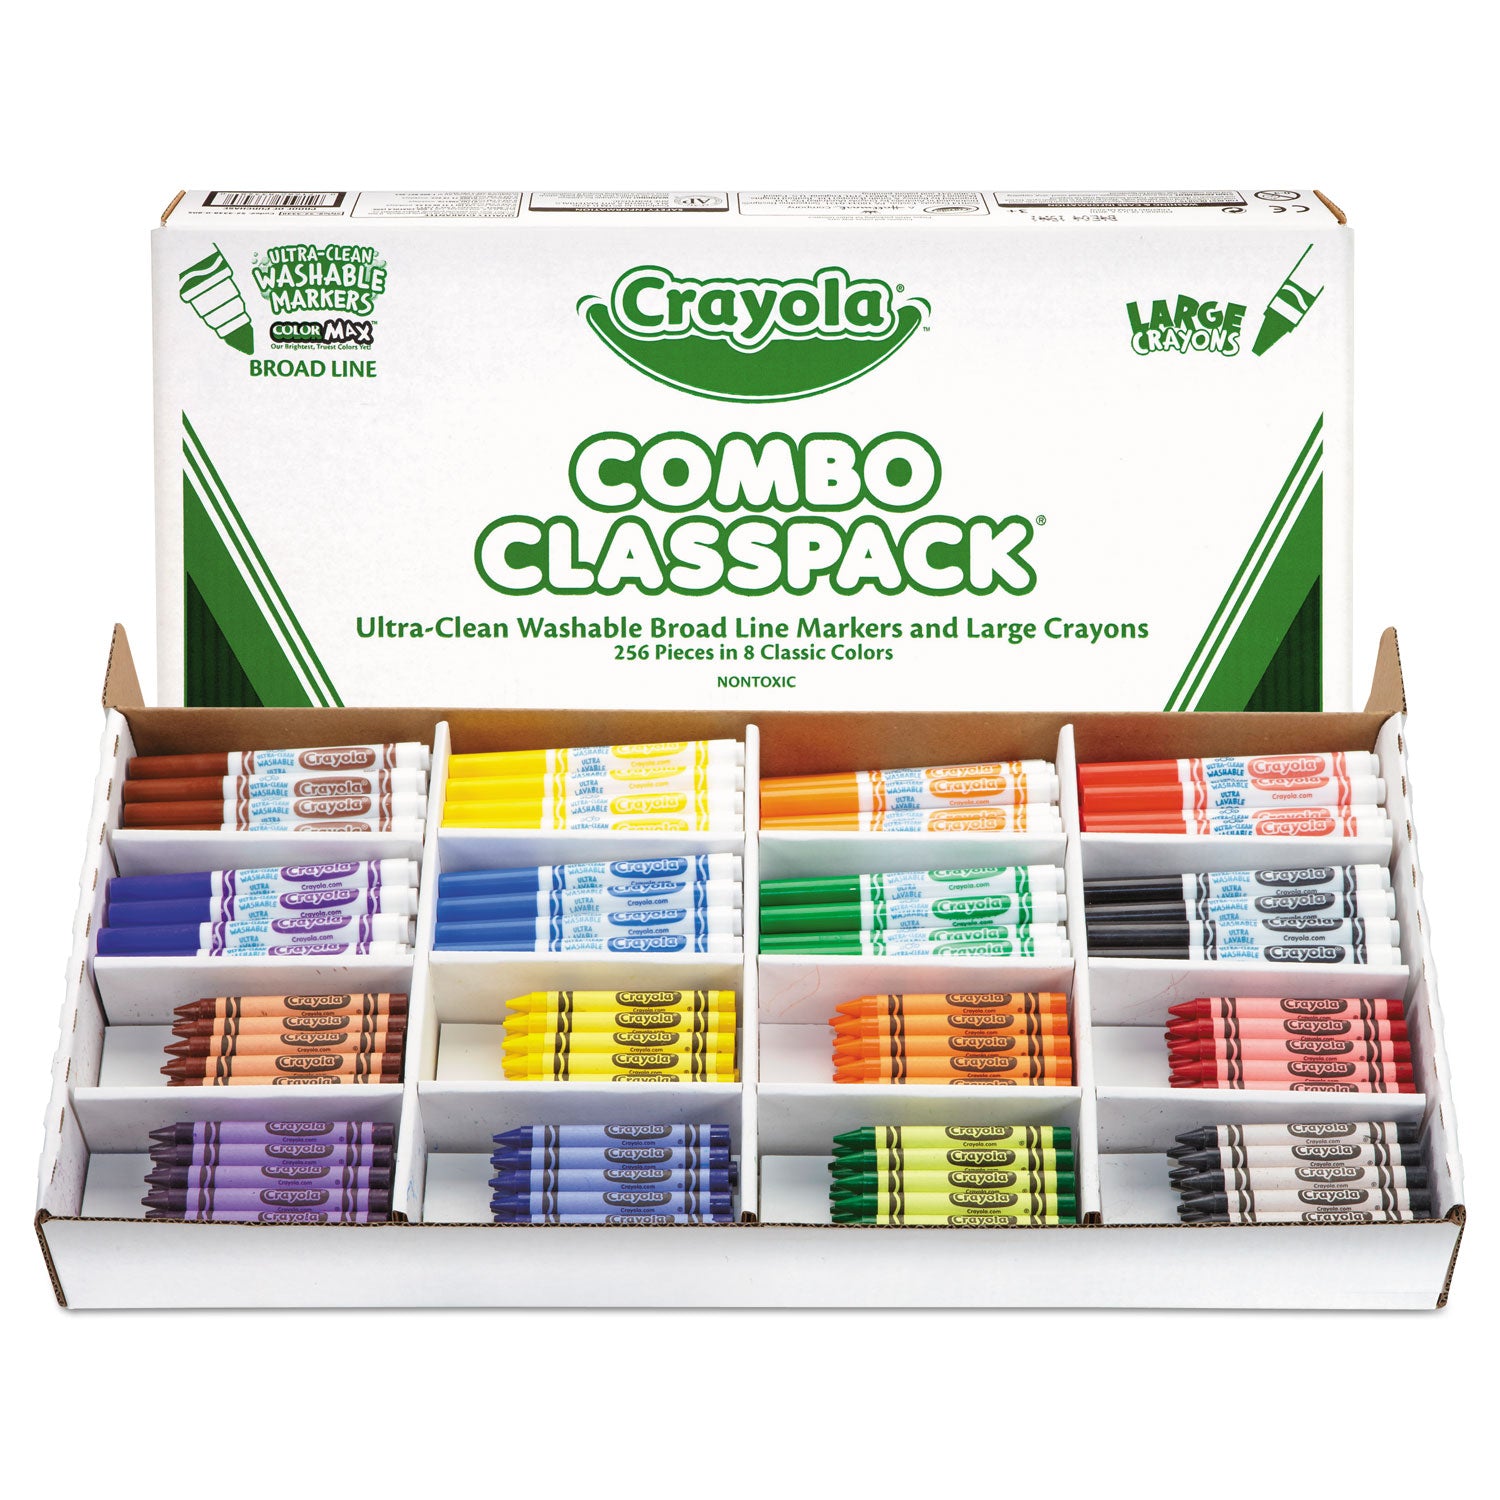 Crayon and Ultra-Clean Washable Marker Classpack, 8 Colors, 128 Each Crayons/Markers, 256/Box - 